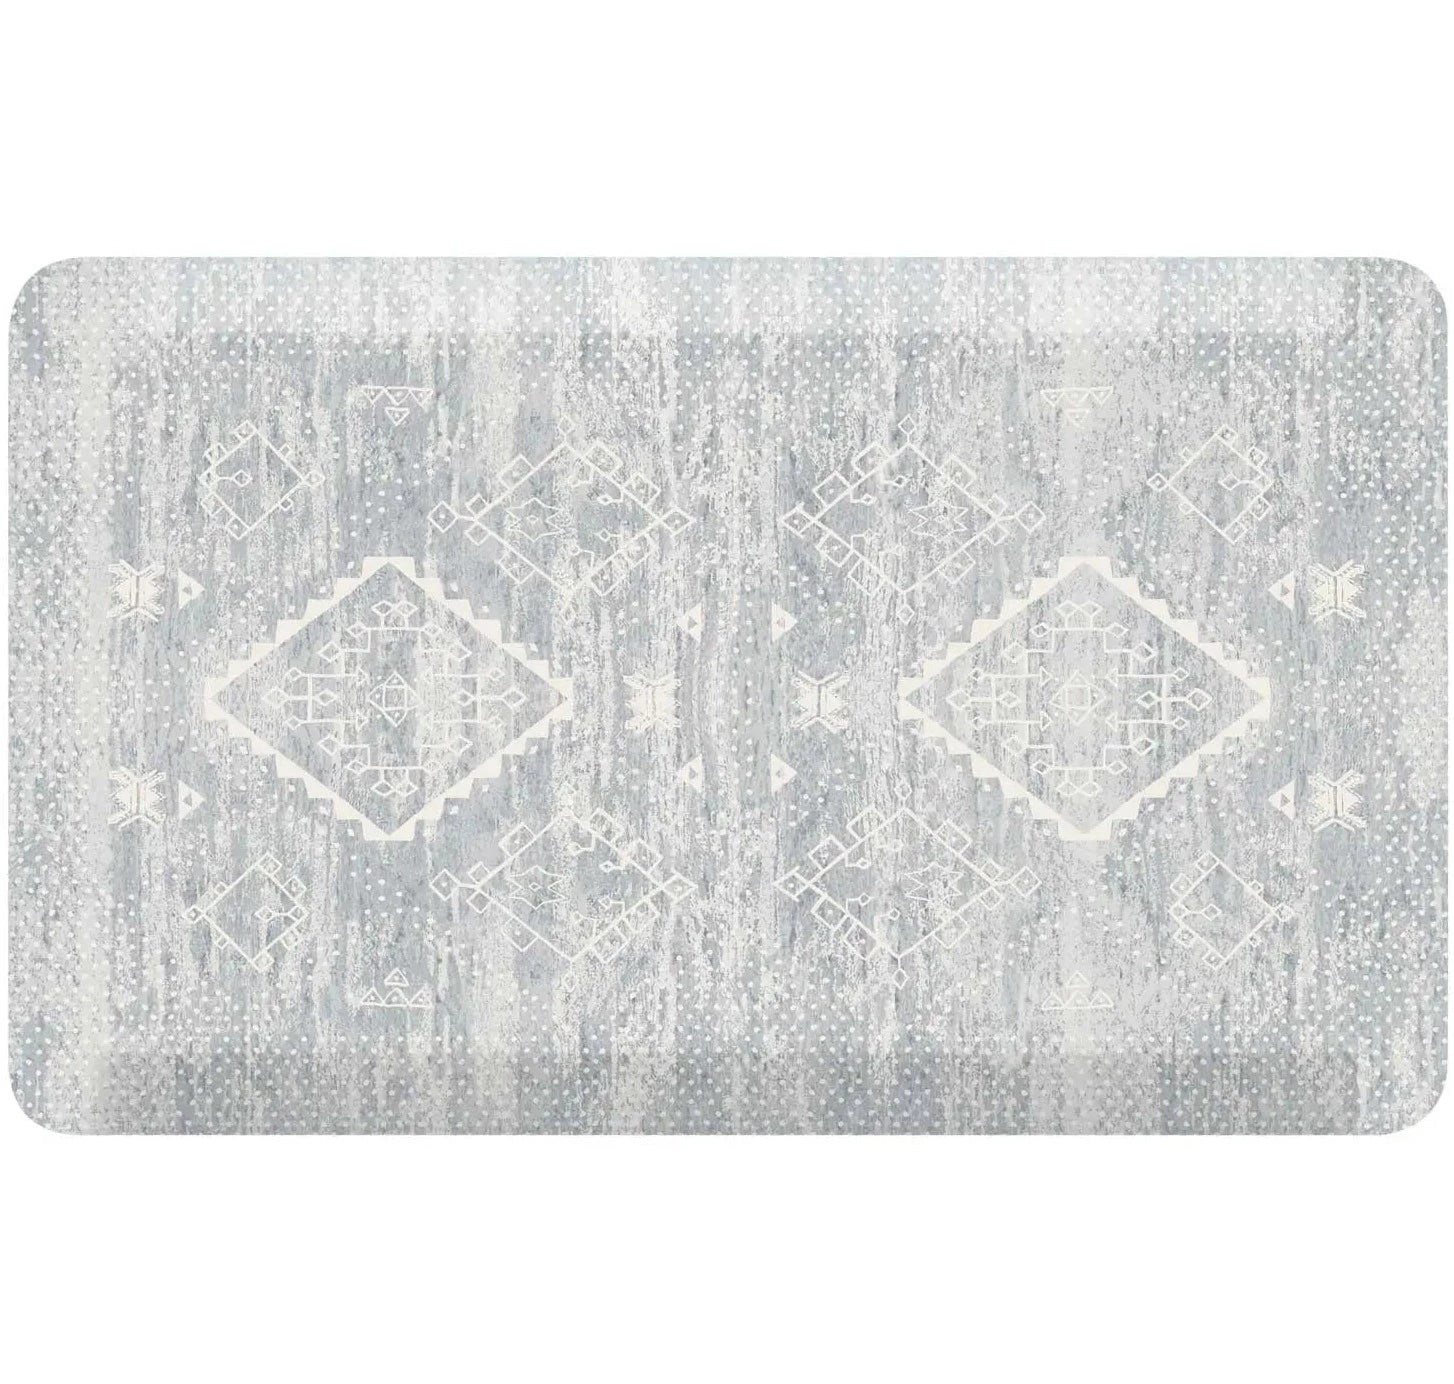 Overhead shot of the Ula gray and white Minimal Boho Pattern anti-fatigue kitchen mat shown in size 22x36